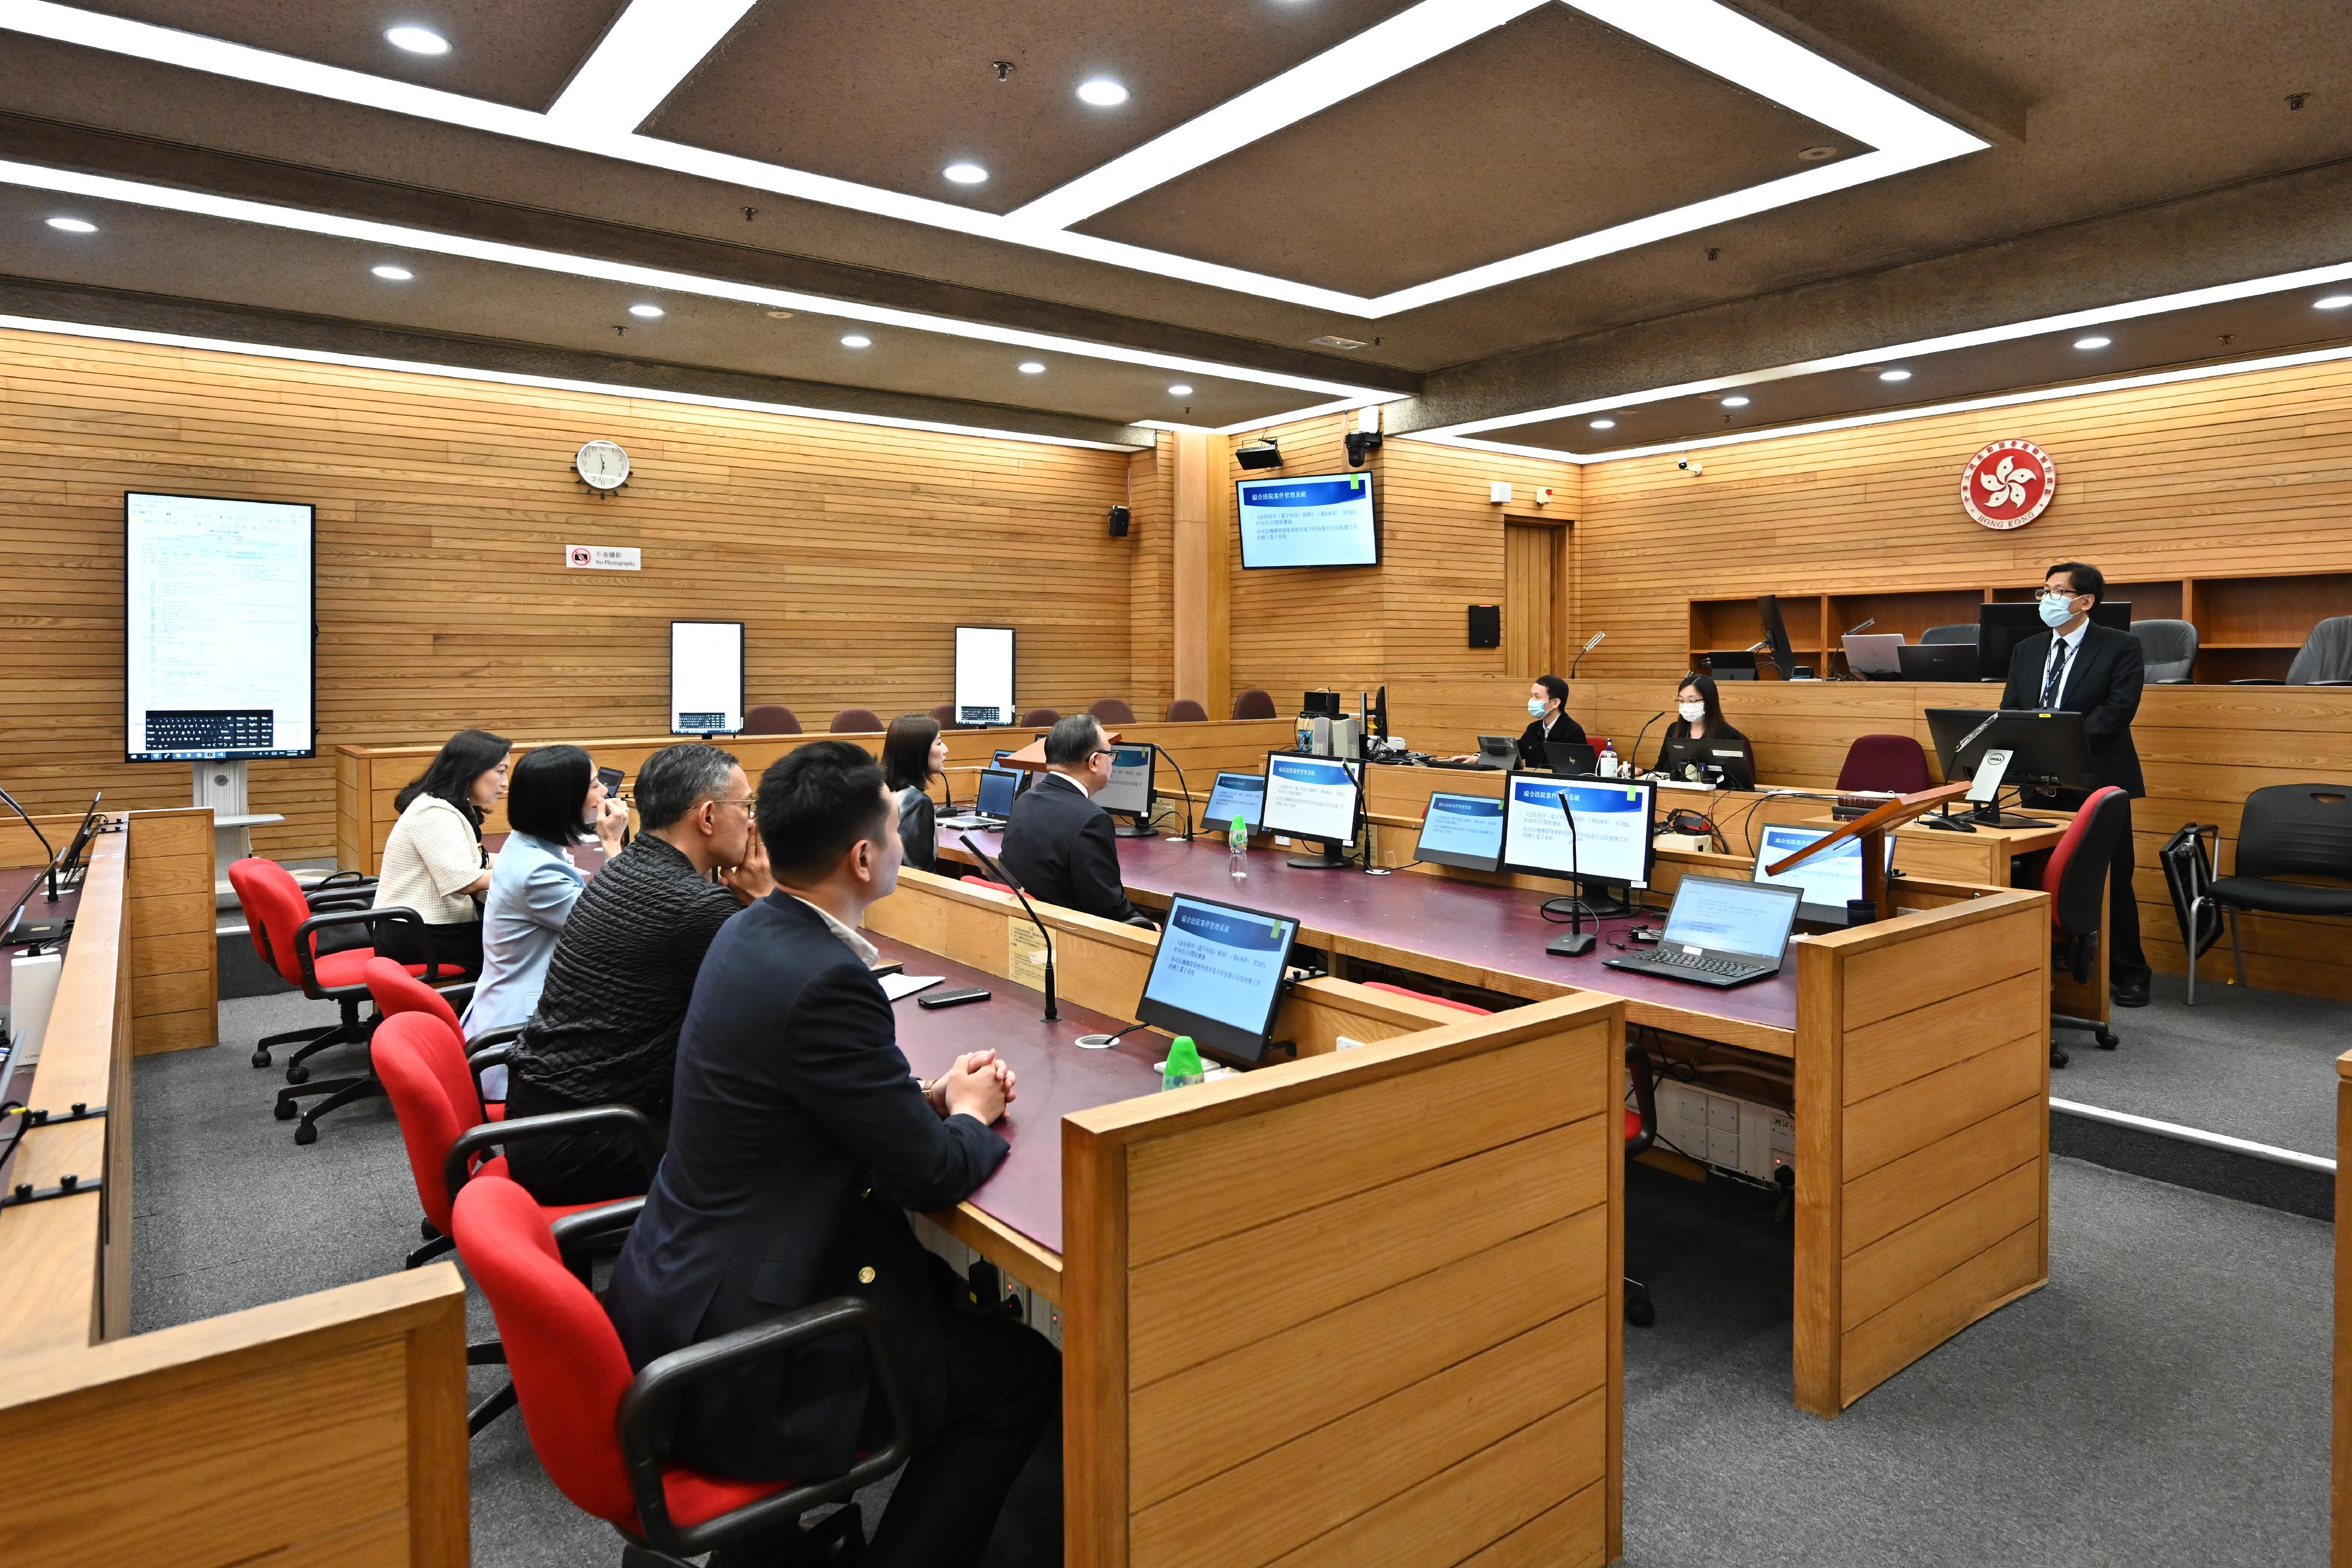 Members of the Legislative Council Panel on Administration of Justice and Legal Services today (June 2) visited the High Court Building and were given a demonstration on major initiatives on the use of technology.